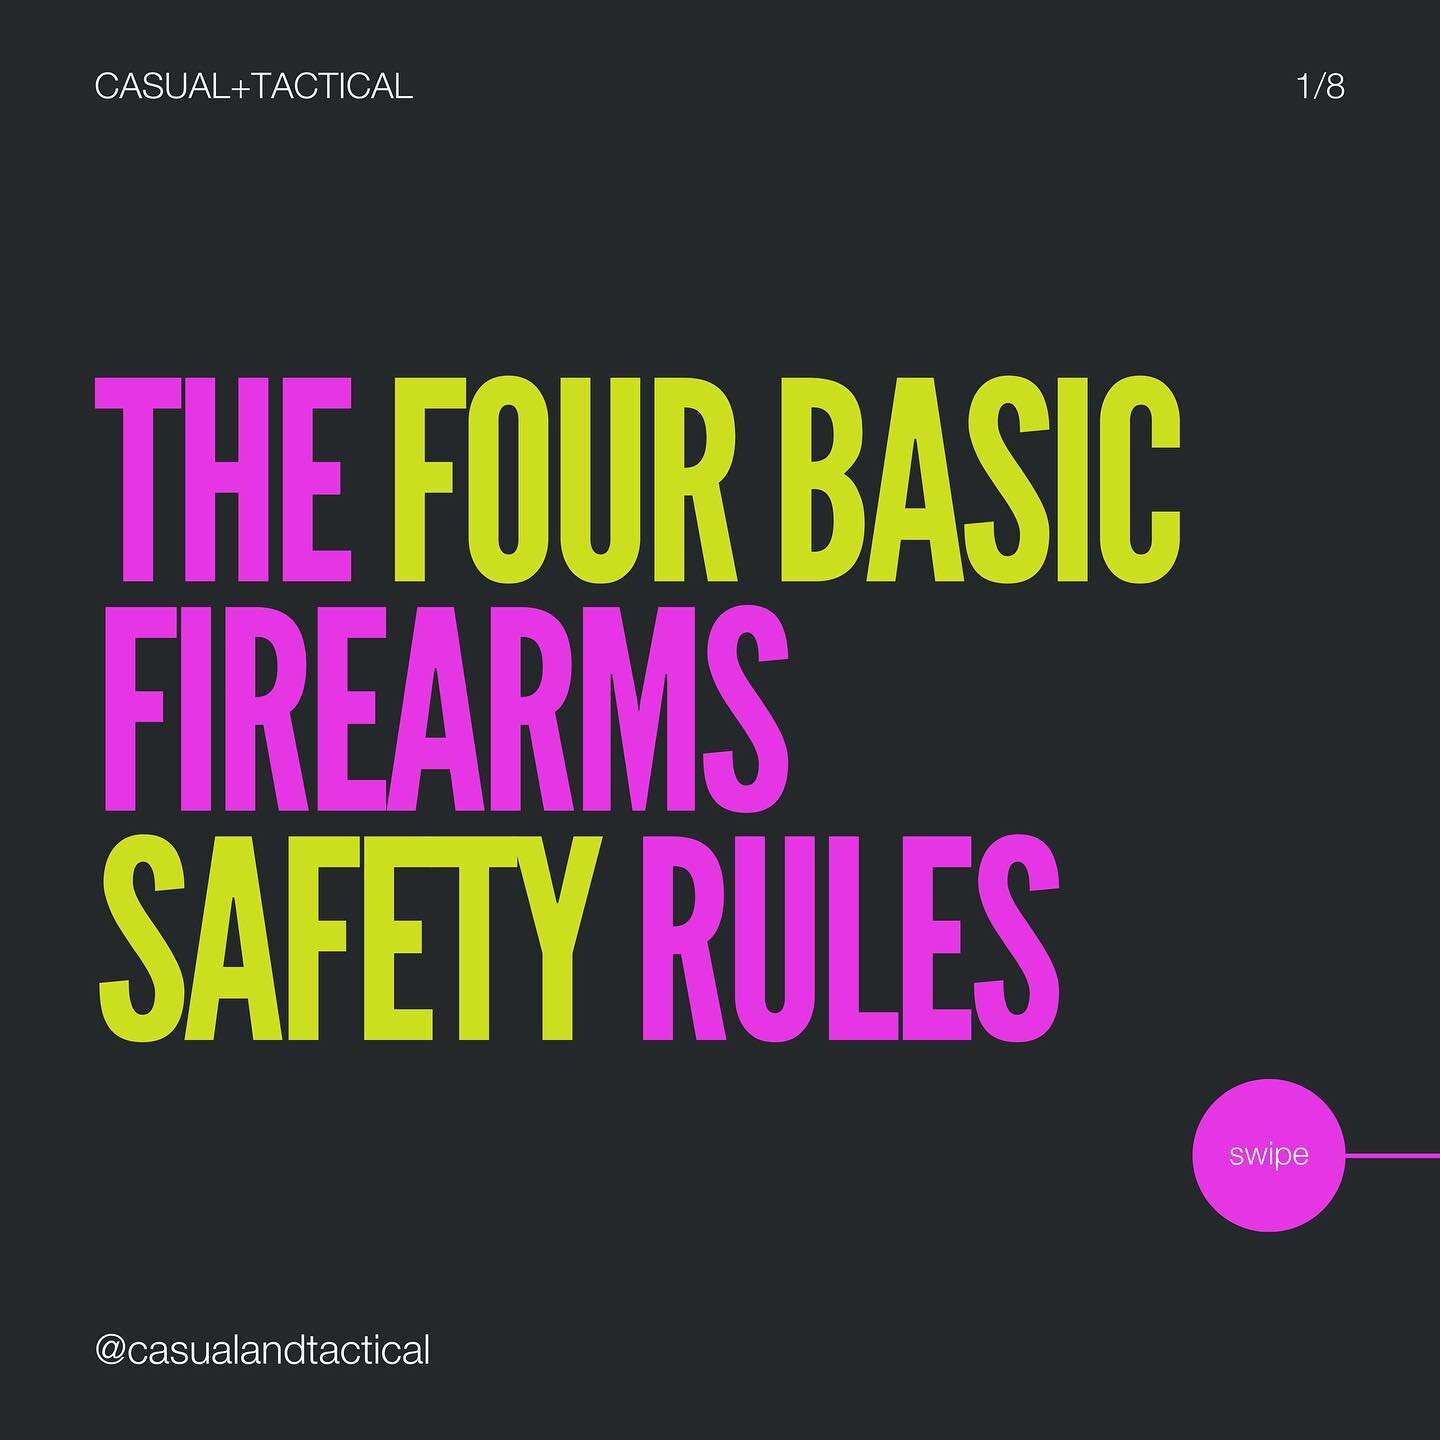 There&rsquo;s no amount of experience that precludes you from practicing the four basic firearms safety rules.

They apply every time and all the time. 

Learn them. Memorize them. Practice them.

Swipe to the summary slide and share it to your story